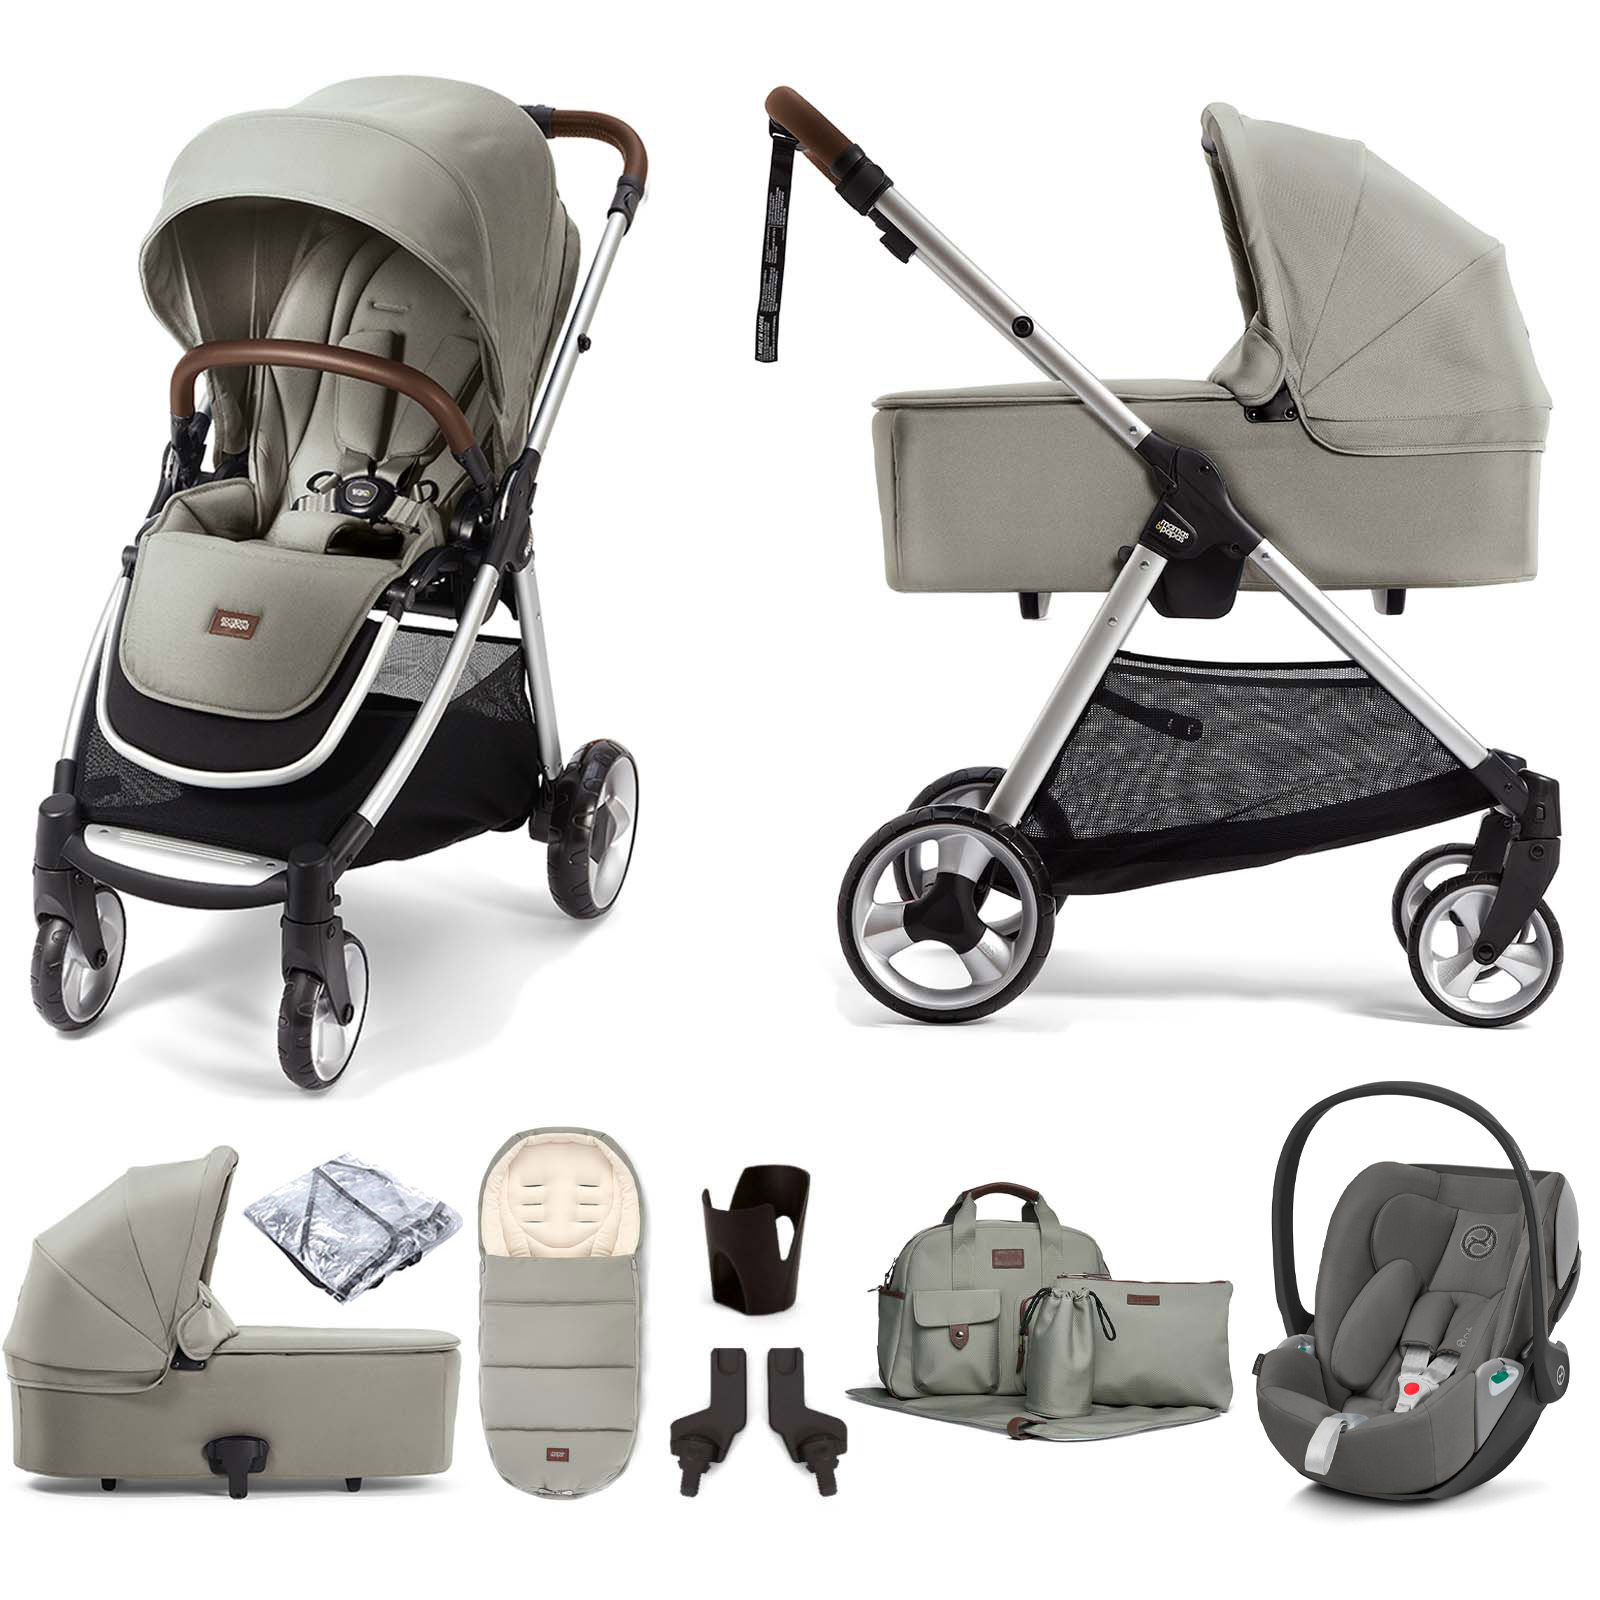 Mamas & Papas Flip XT2 with Carrycot (Cloud Z2 i-Size Car Seat) Travel System and Accessories - Sage Green